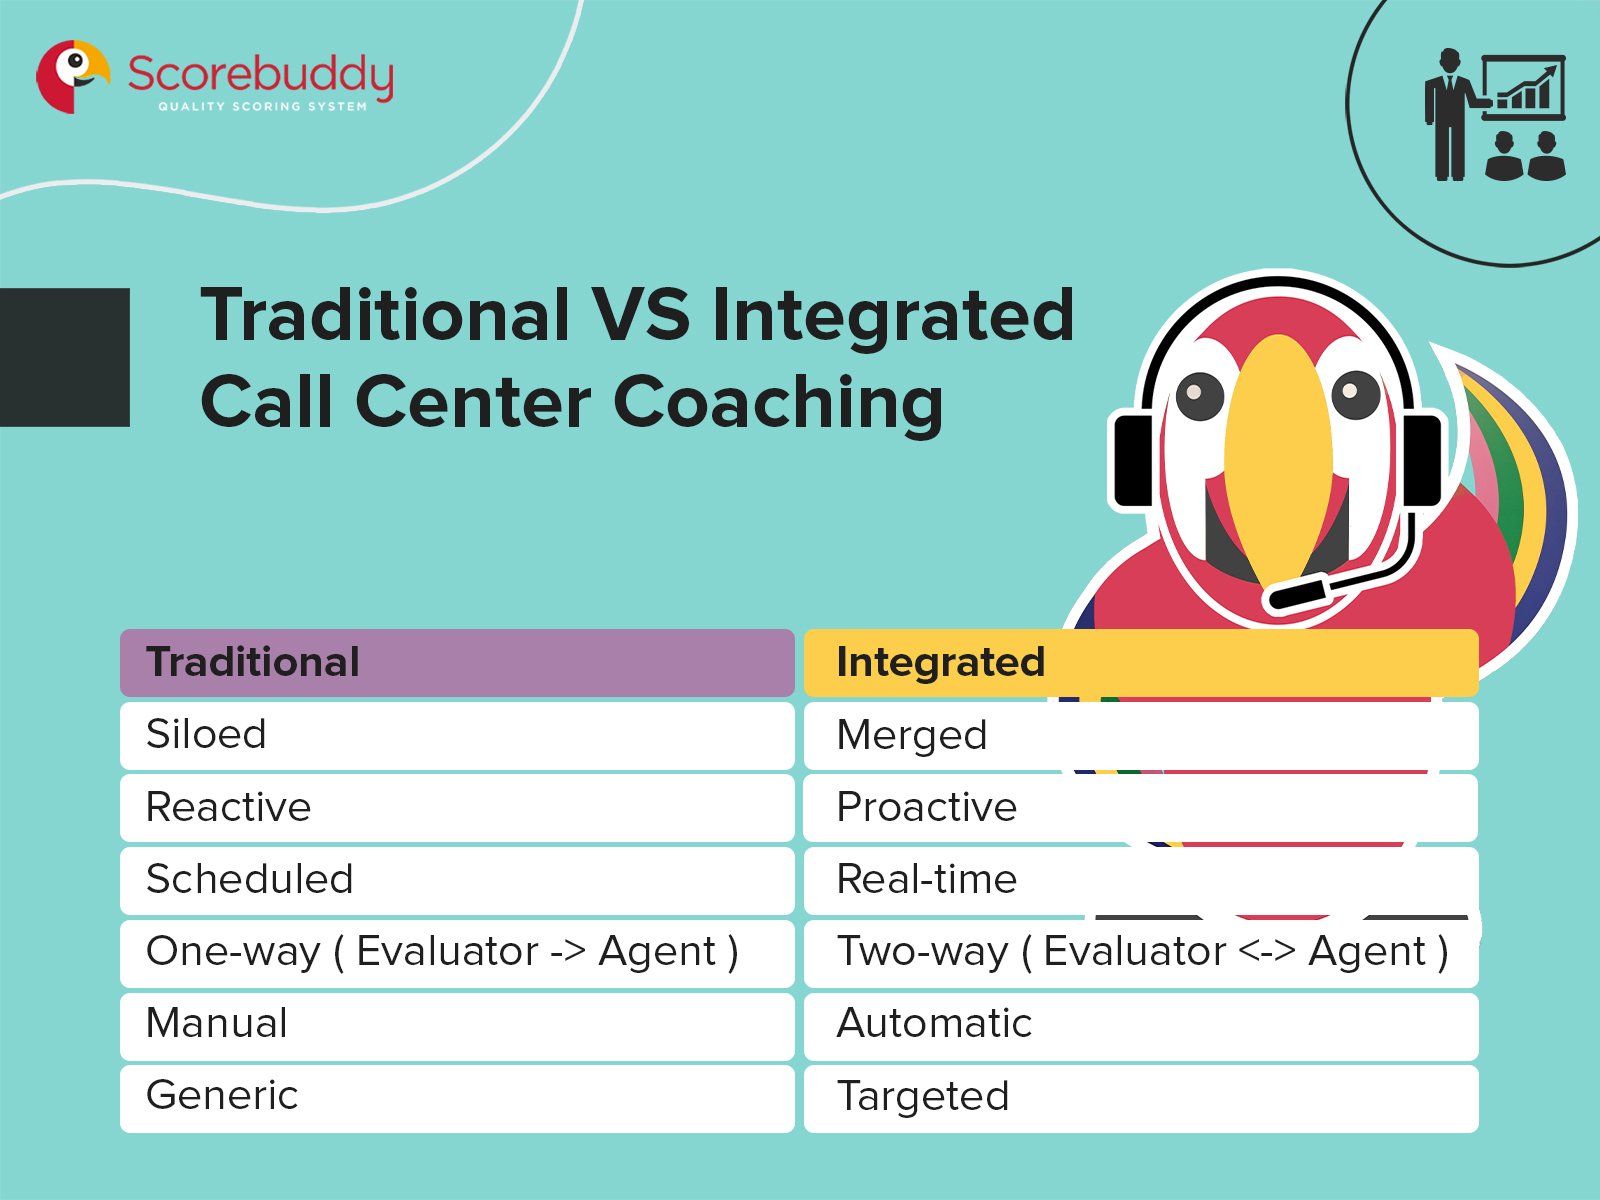 Traditional vs Integrated Call Center Coaching